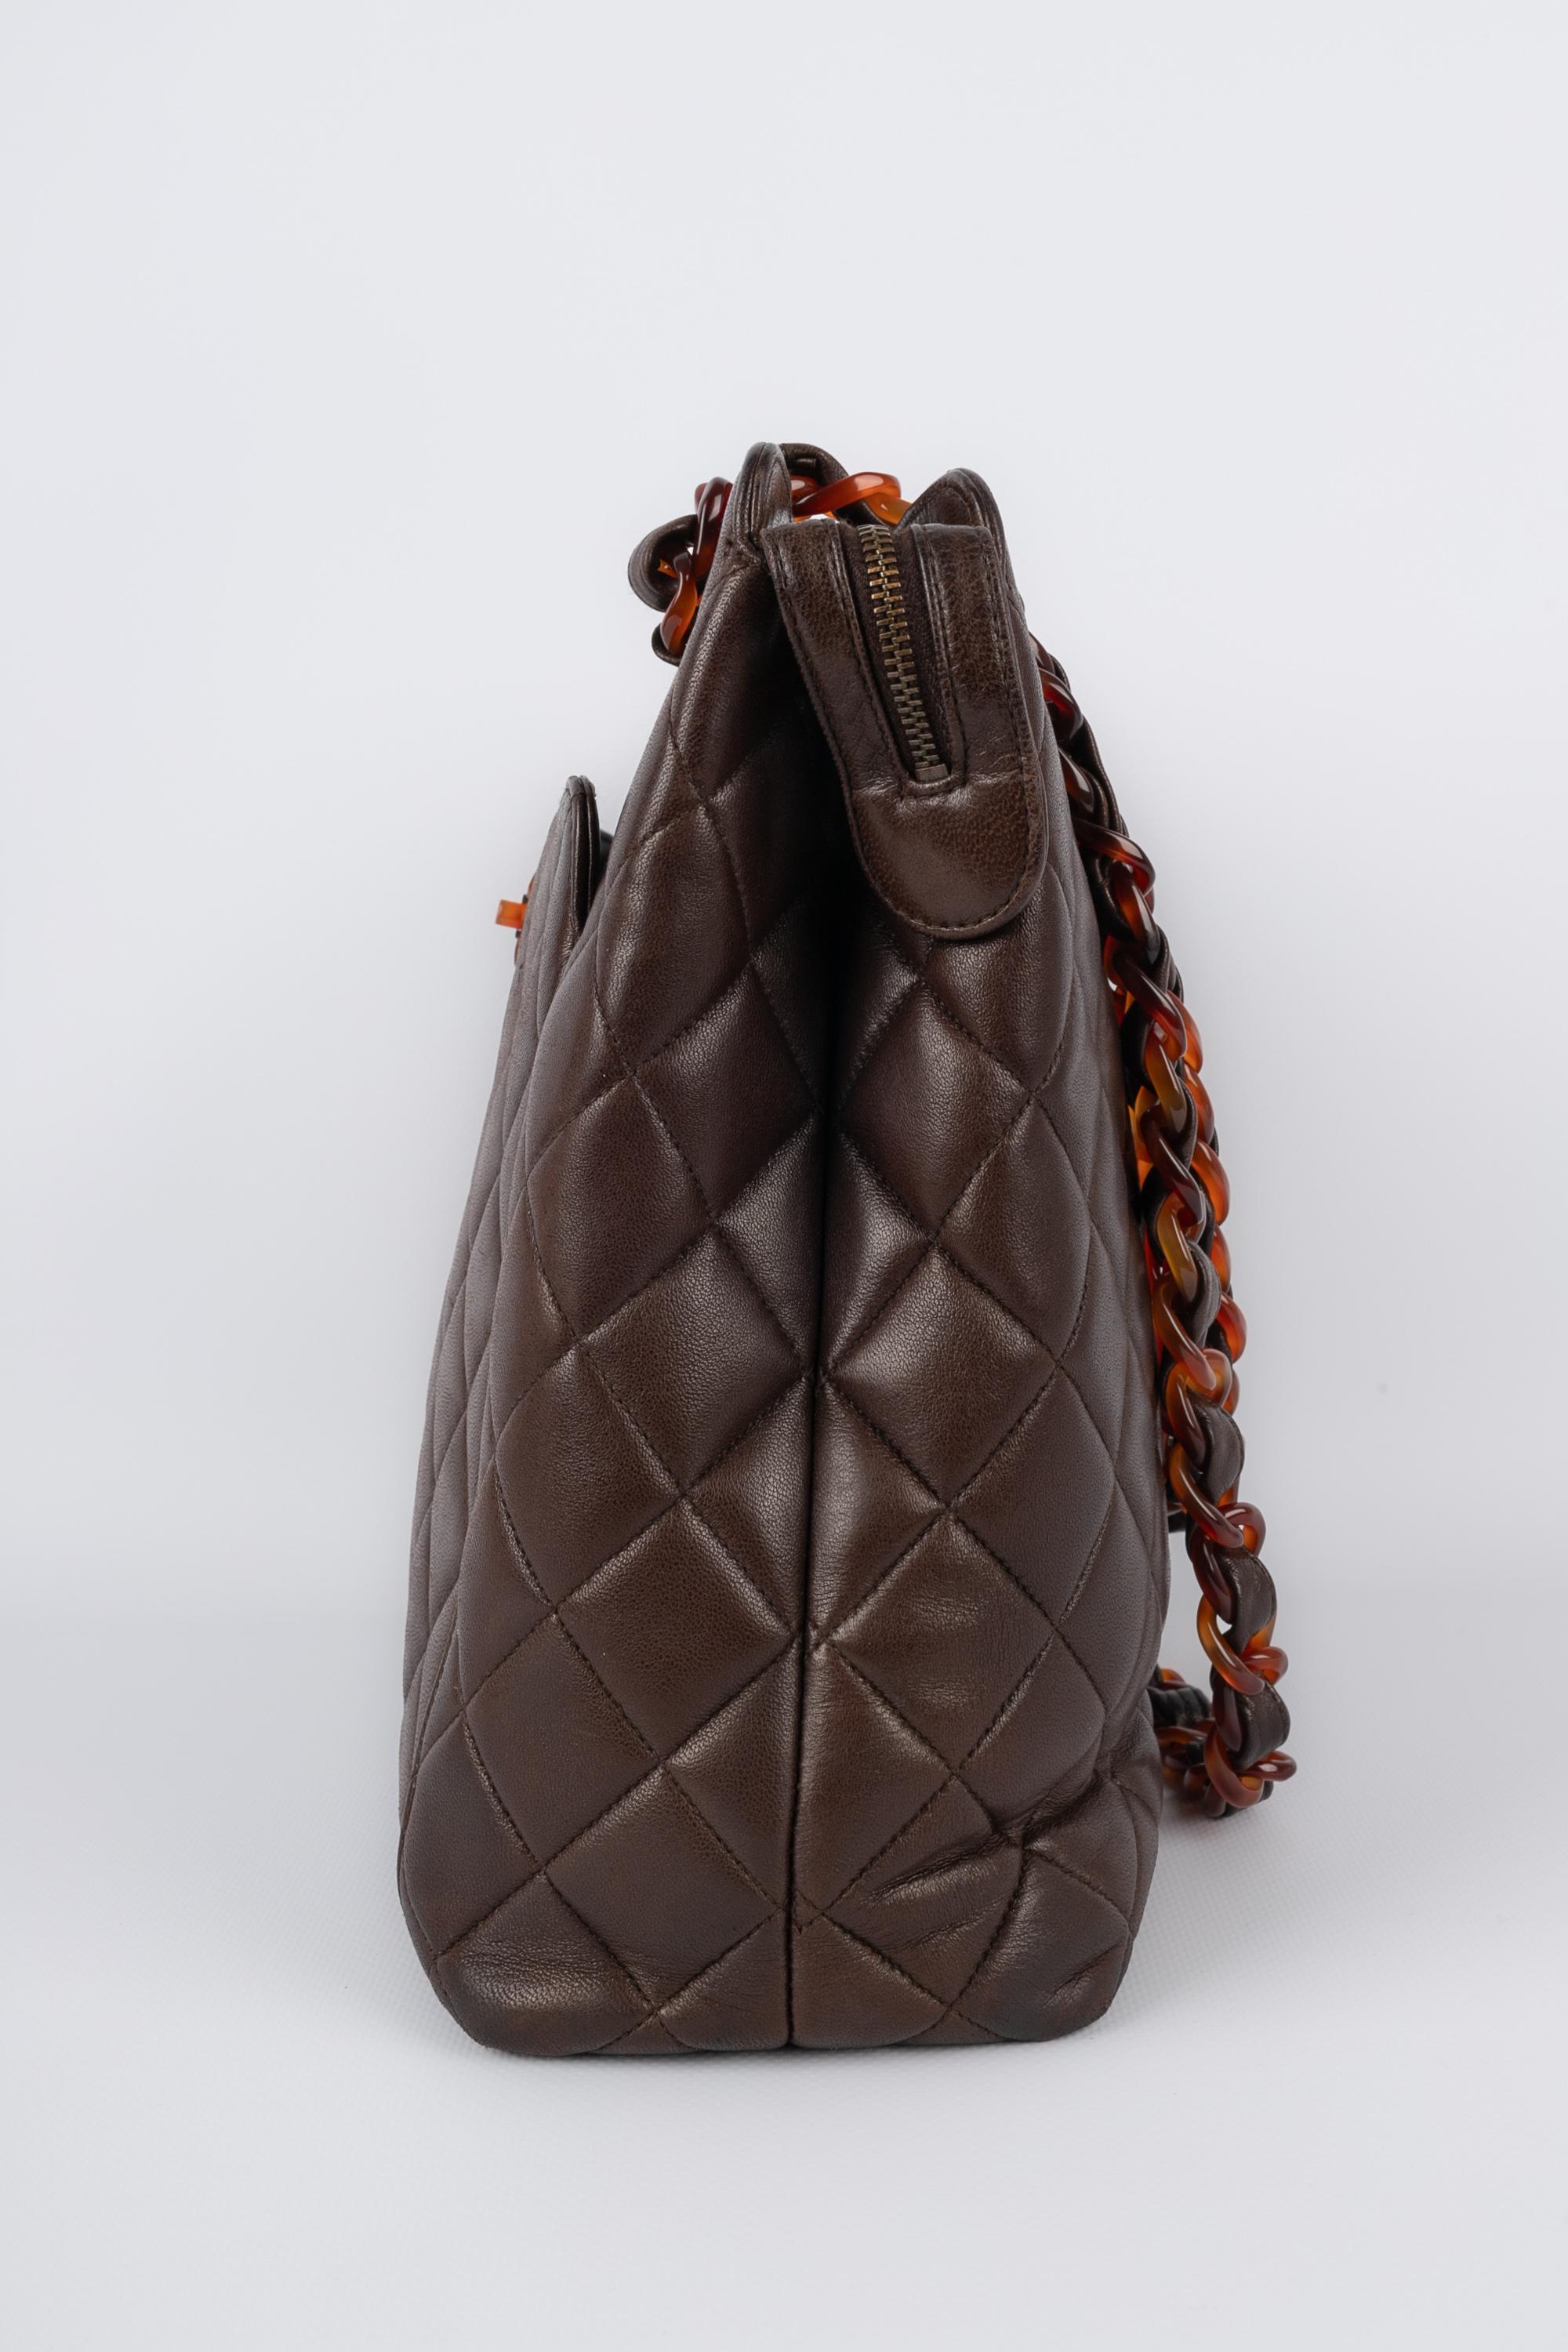 CHANEL - (Made in France) Quilted brown leather bag with tortoiseshell bakelite elements. 1994 circa Collection.

Condition:
Good condition

Dimensions:
Length: 30 cm - Height: 27 cm - Depth: 8.5 cm - Handle length: 62 cm

S17